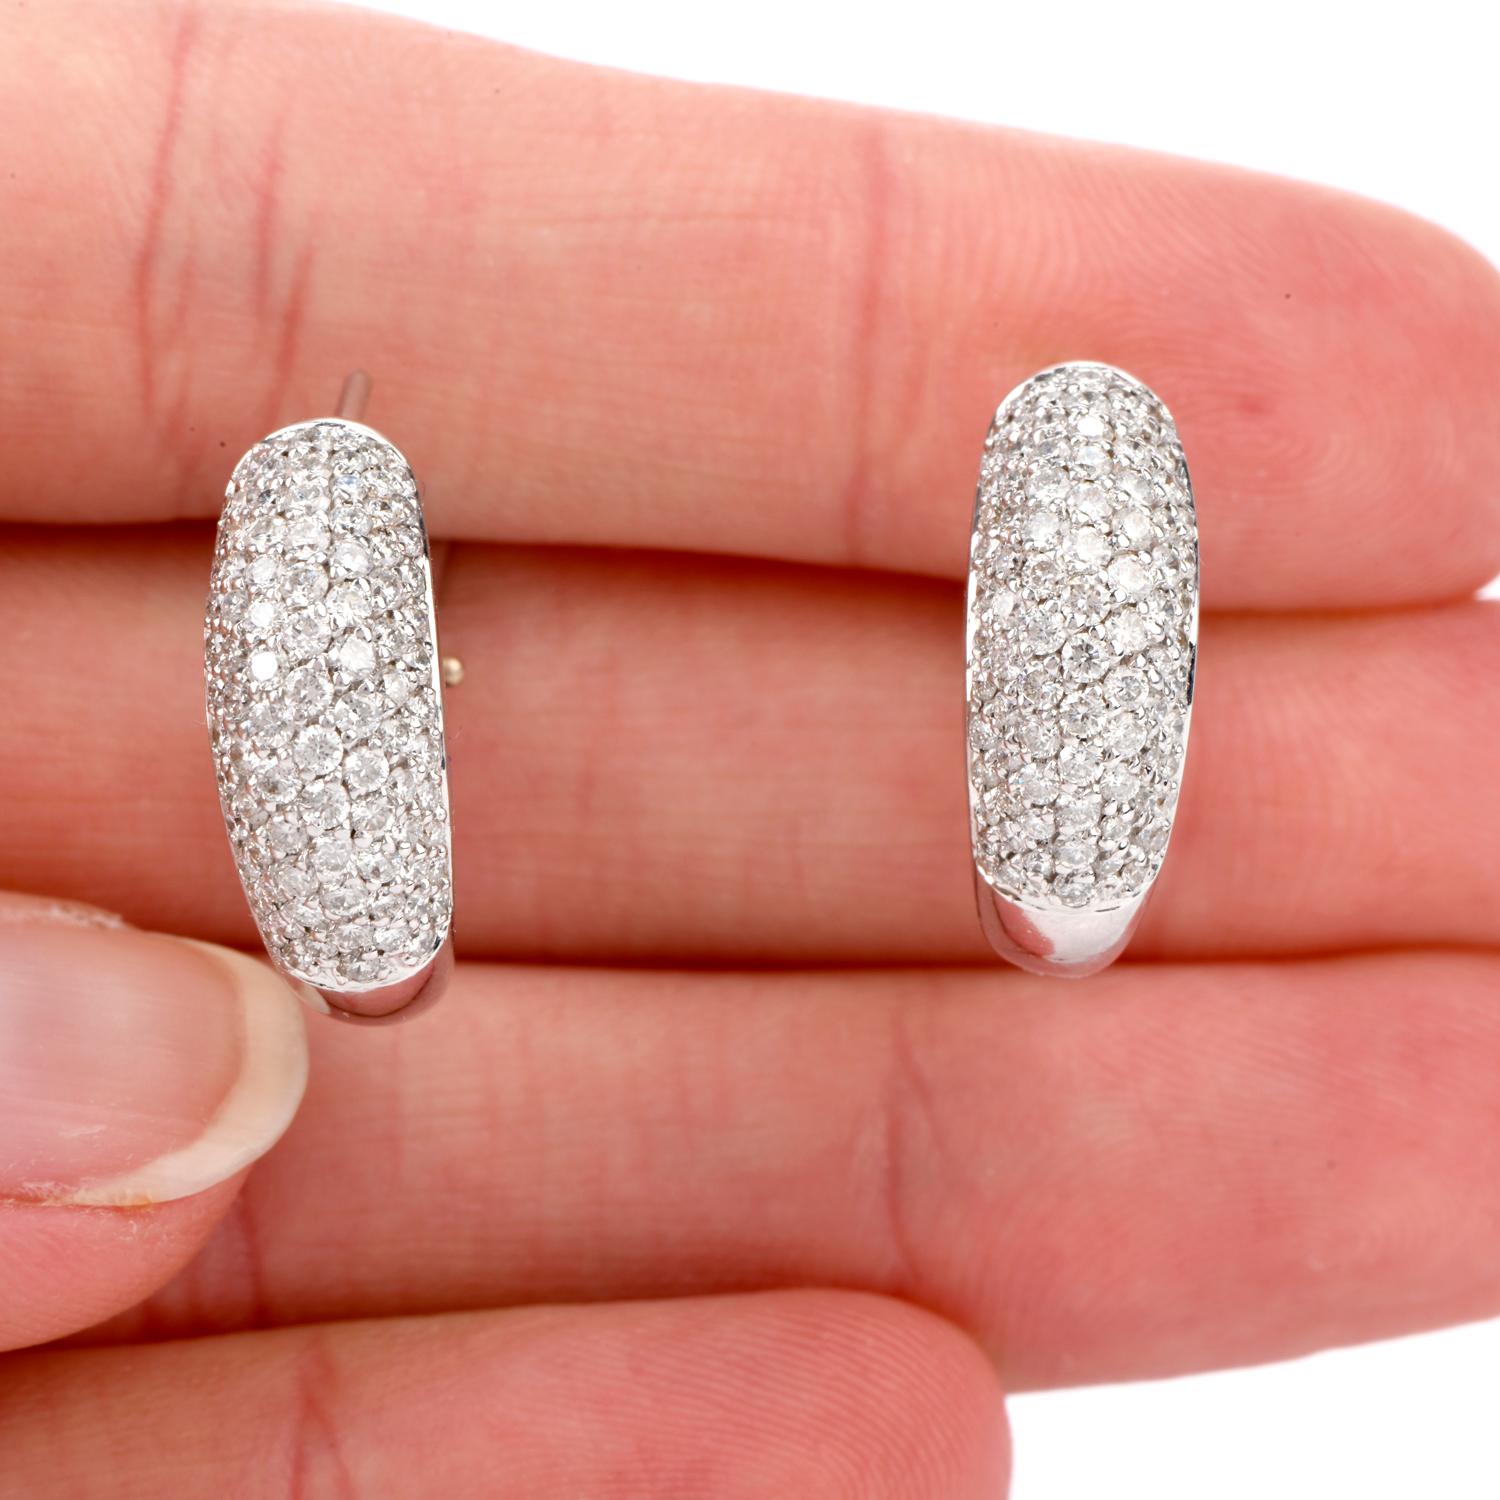 These beautiful Pave Diamond Earrings were inspired in a Domed Hoop motif and crafted in 18 Karat white Gold.

Over 150 bright white round brilliant cut diamonds adorn these earrings weighing approx. 1.85 carat and are of G-H color and ranging from